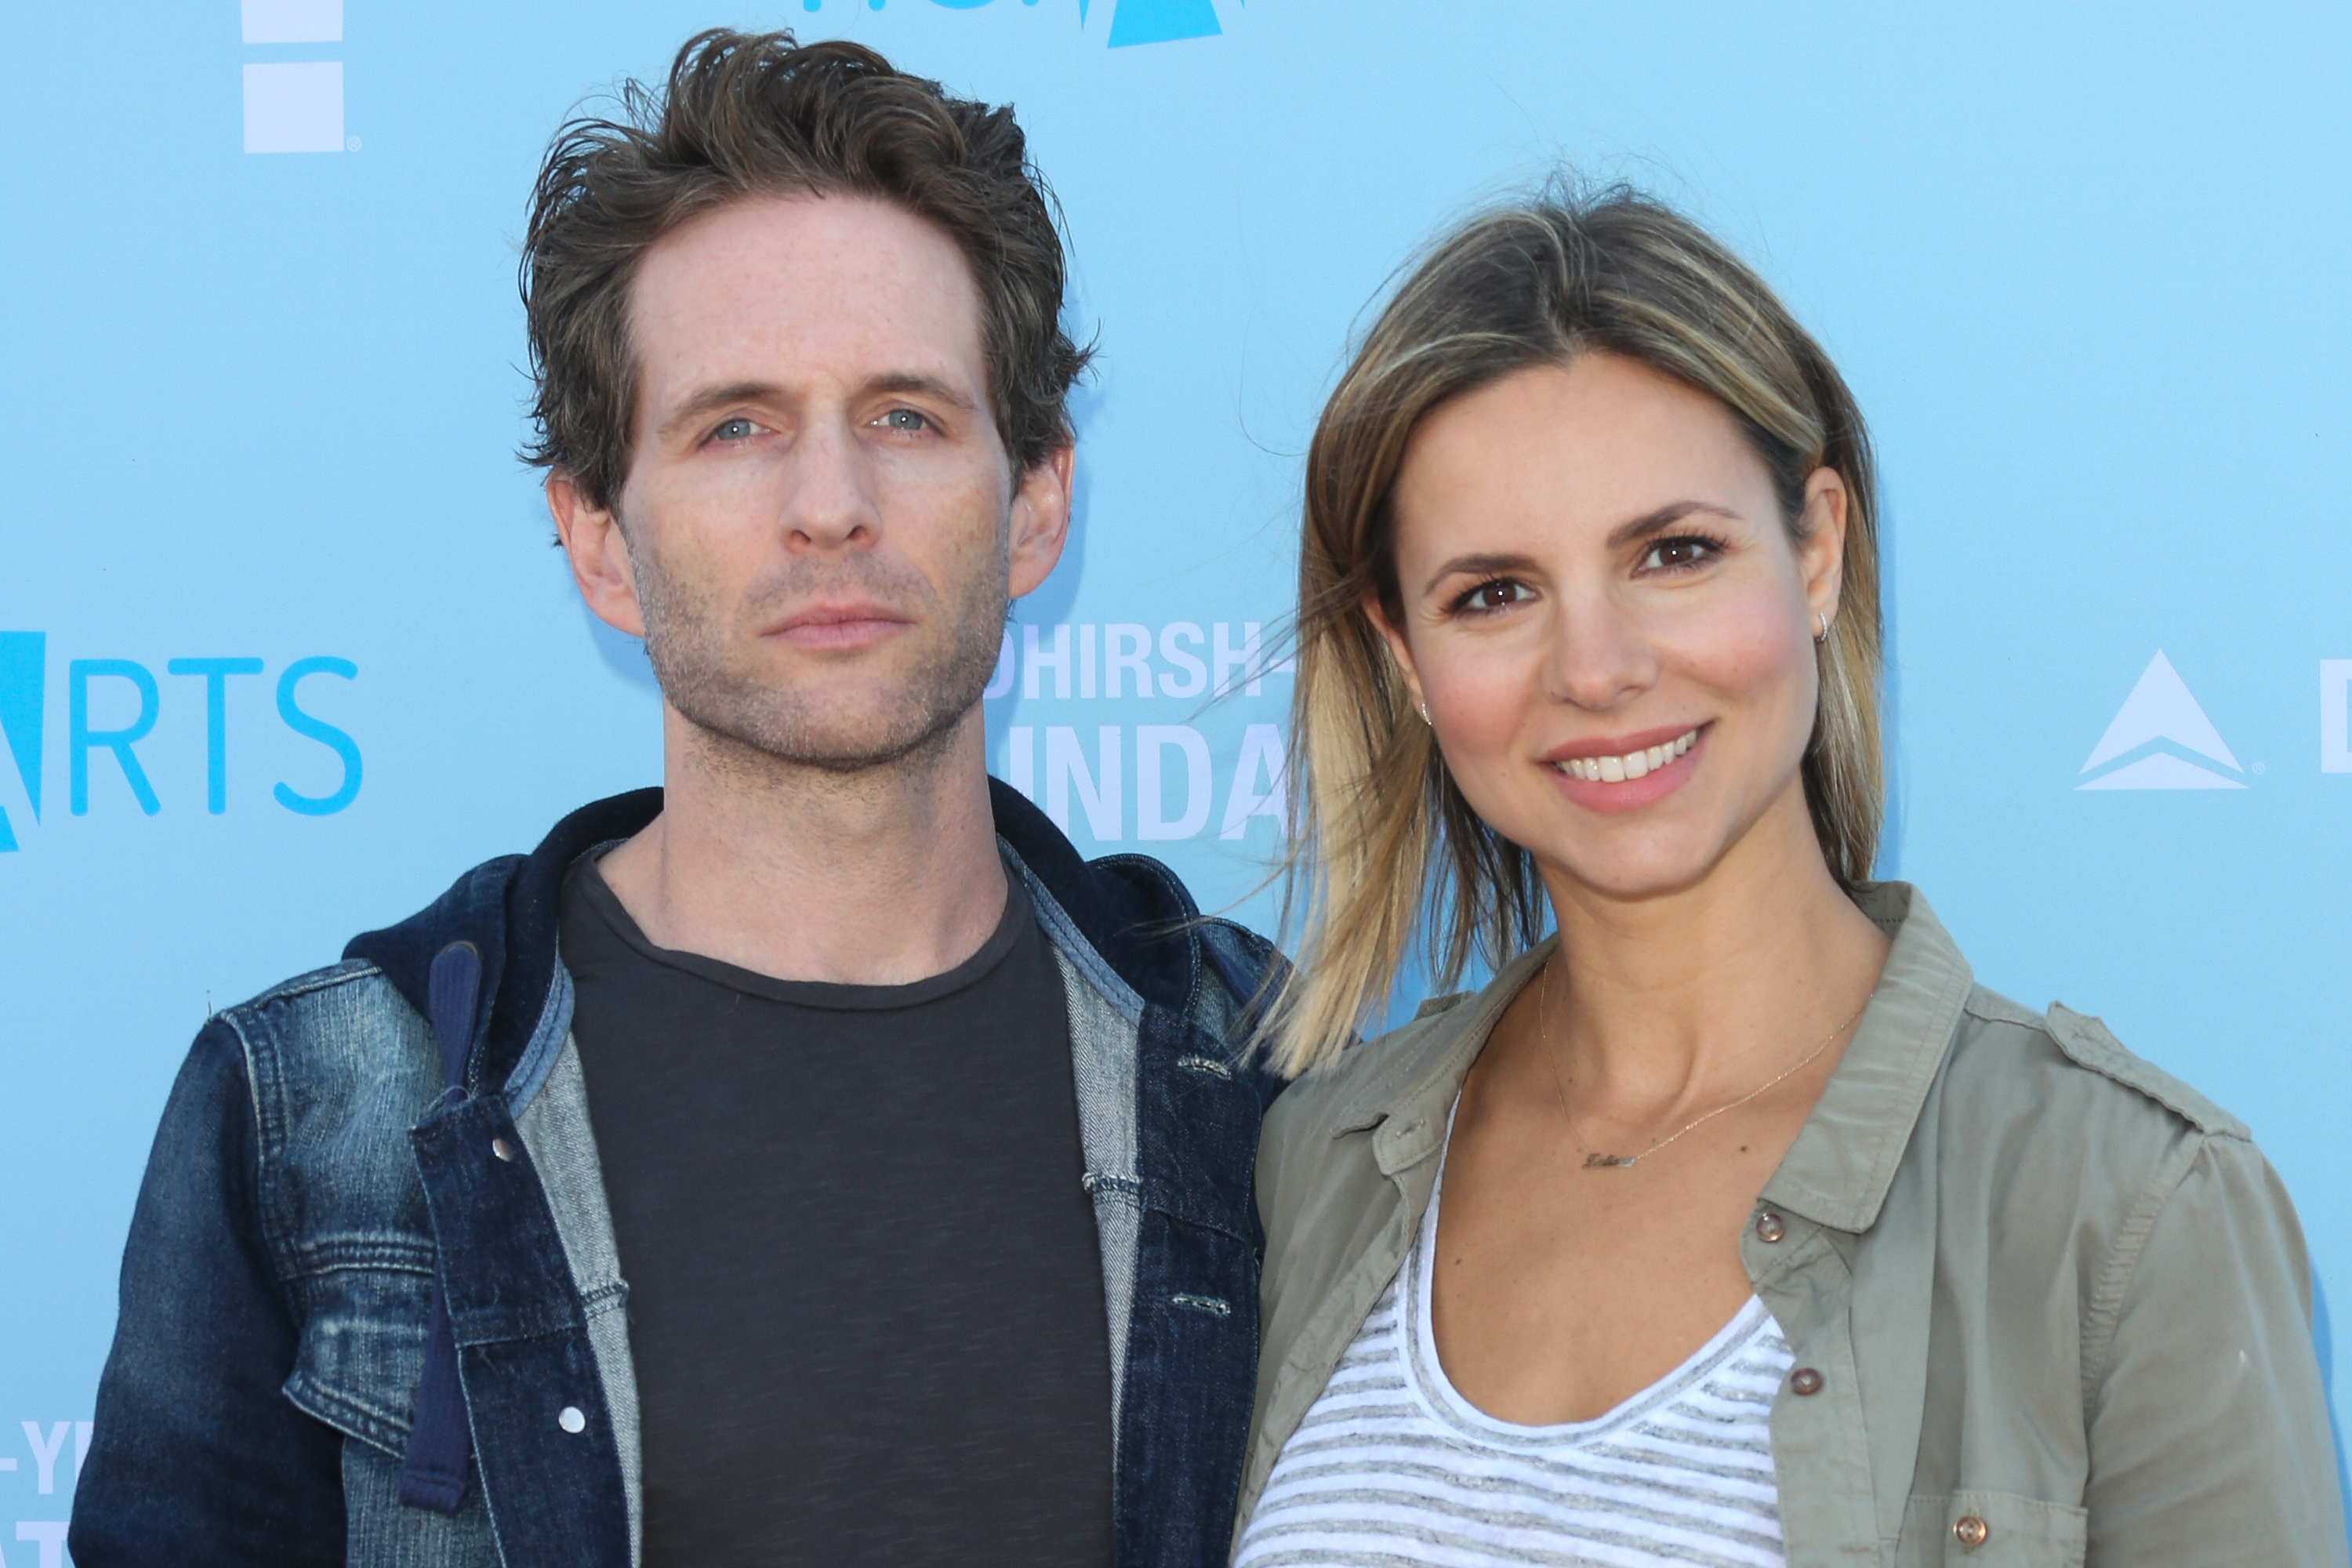 Glenn Howerton and Jill Latiano attend the P.S. Arts Express Yourself 2018 at Barker Hangar on October 7, 2018 in Santa Monica, California | Source: Getty Images